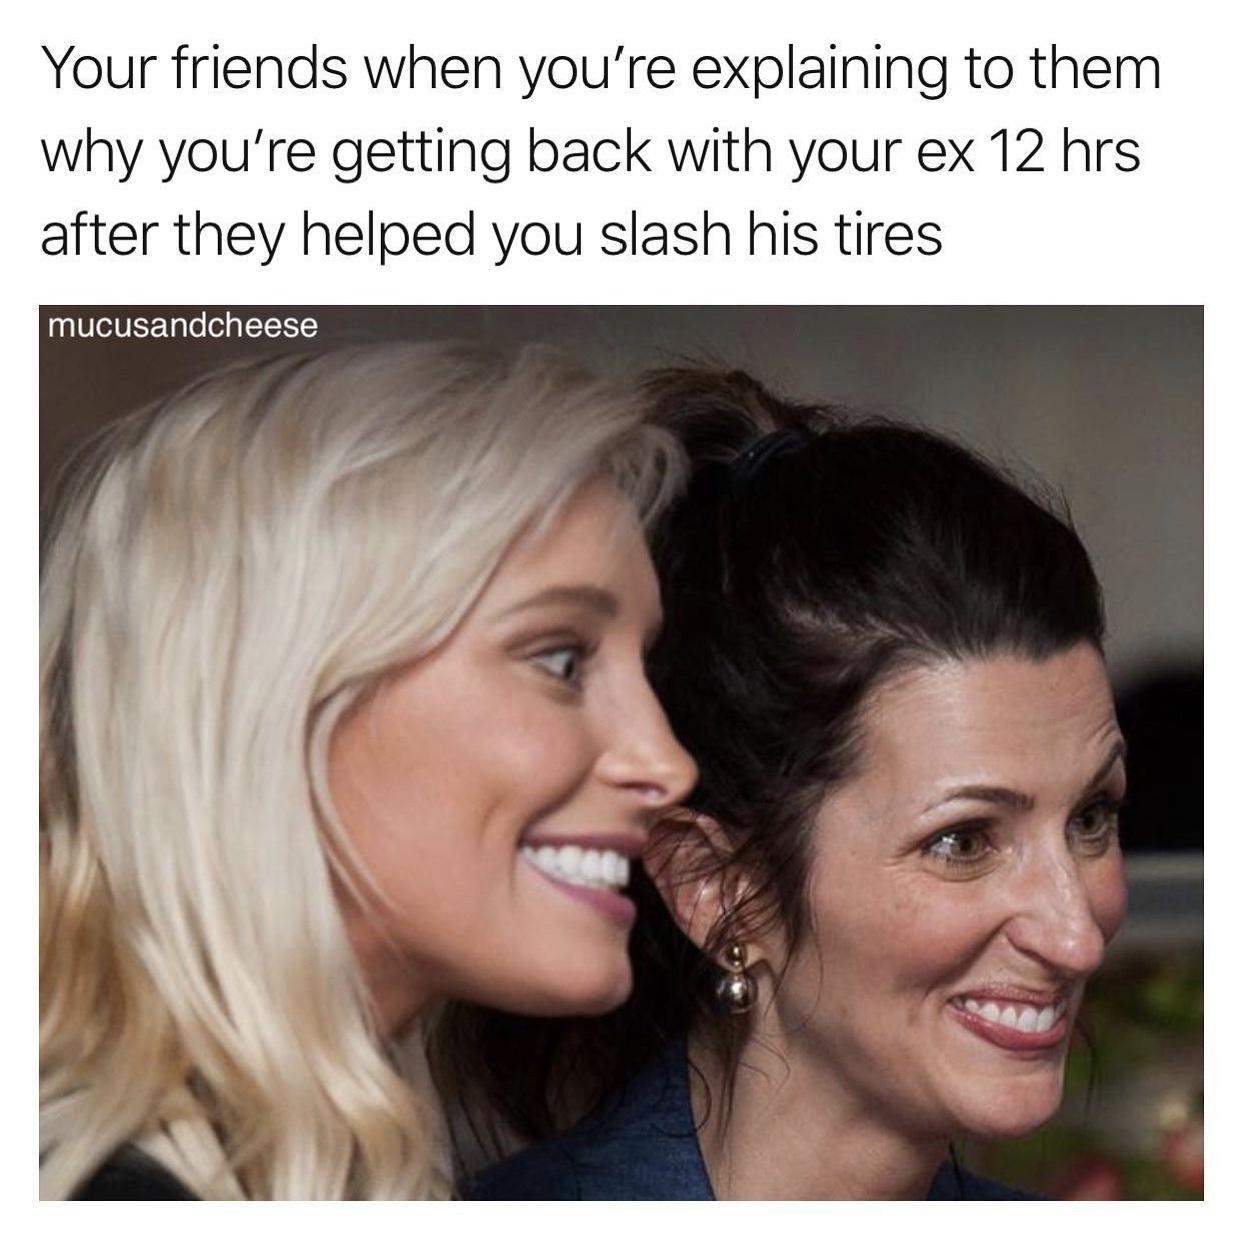 smile - Your friends when you're explaining to them why you're getting back with your ex 12 hrs after they helped you slash his tires mucusandcheese